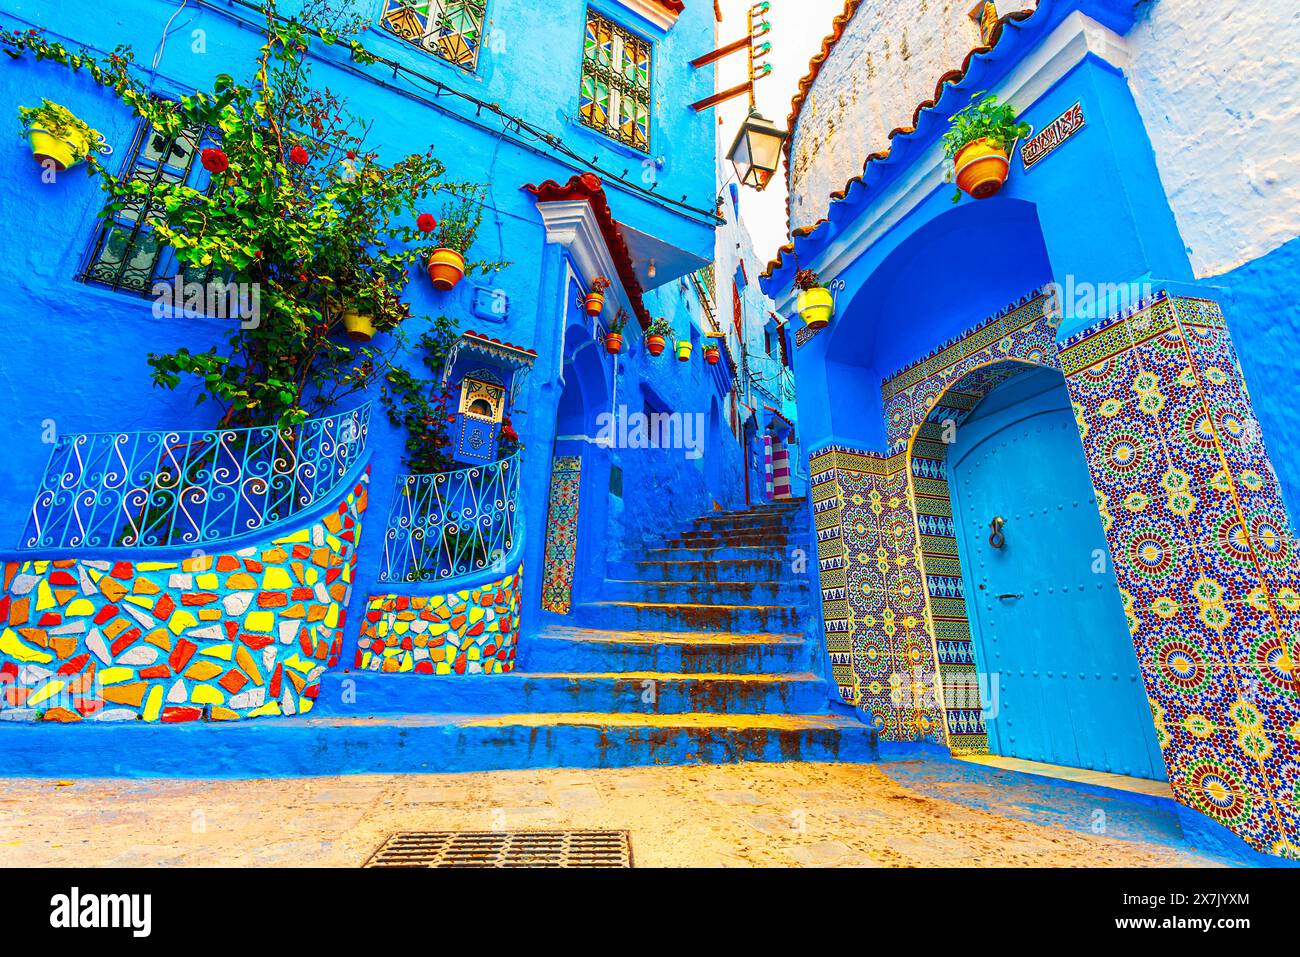 Chefchaouen, Morocco: Blue narow stairs with colourful walls and flowerpots into old walled city, or medina, North Africa travel destination Stock Photo